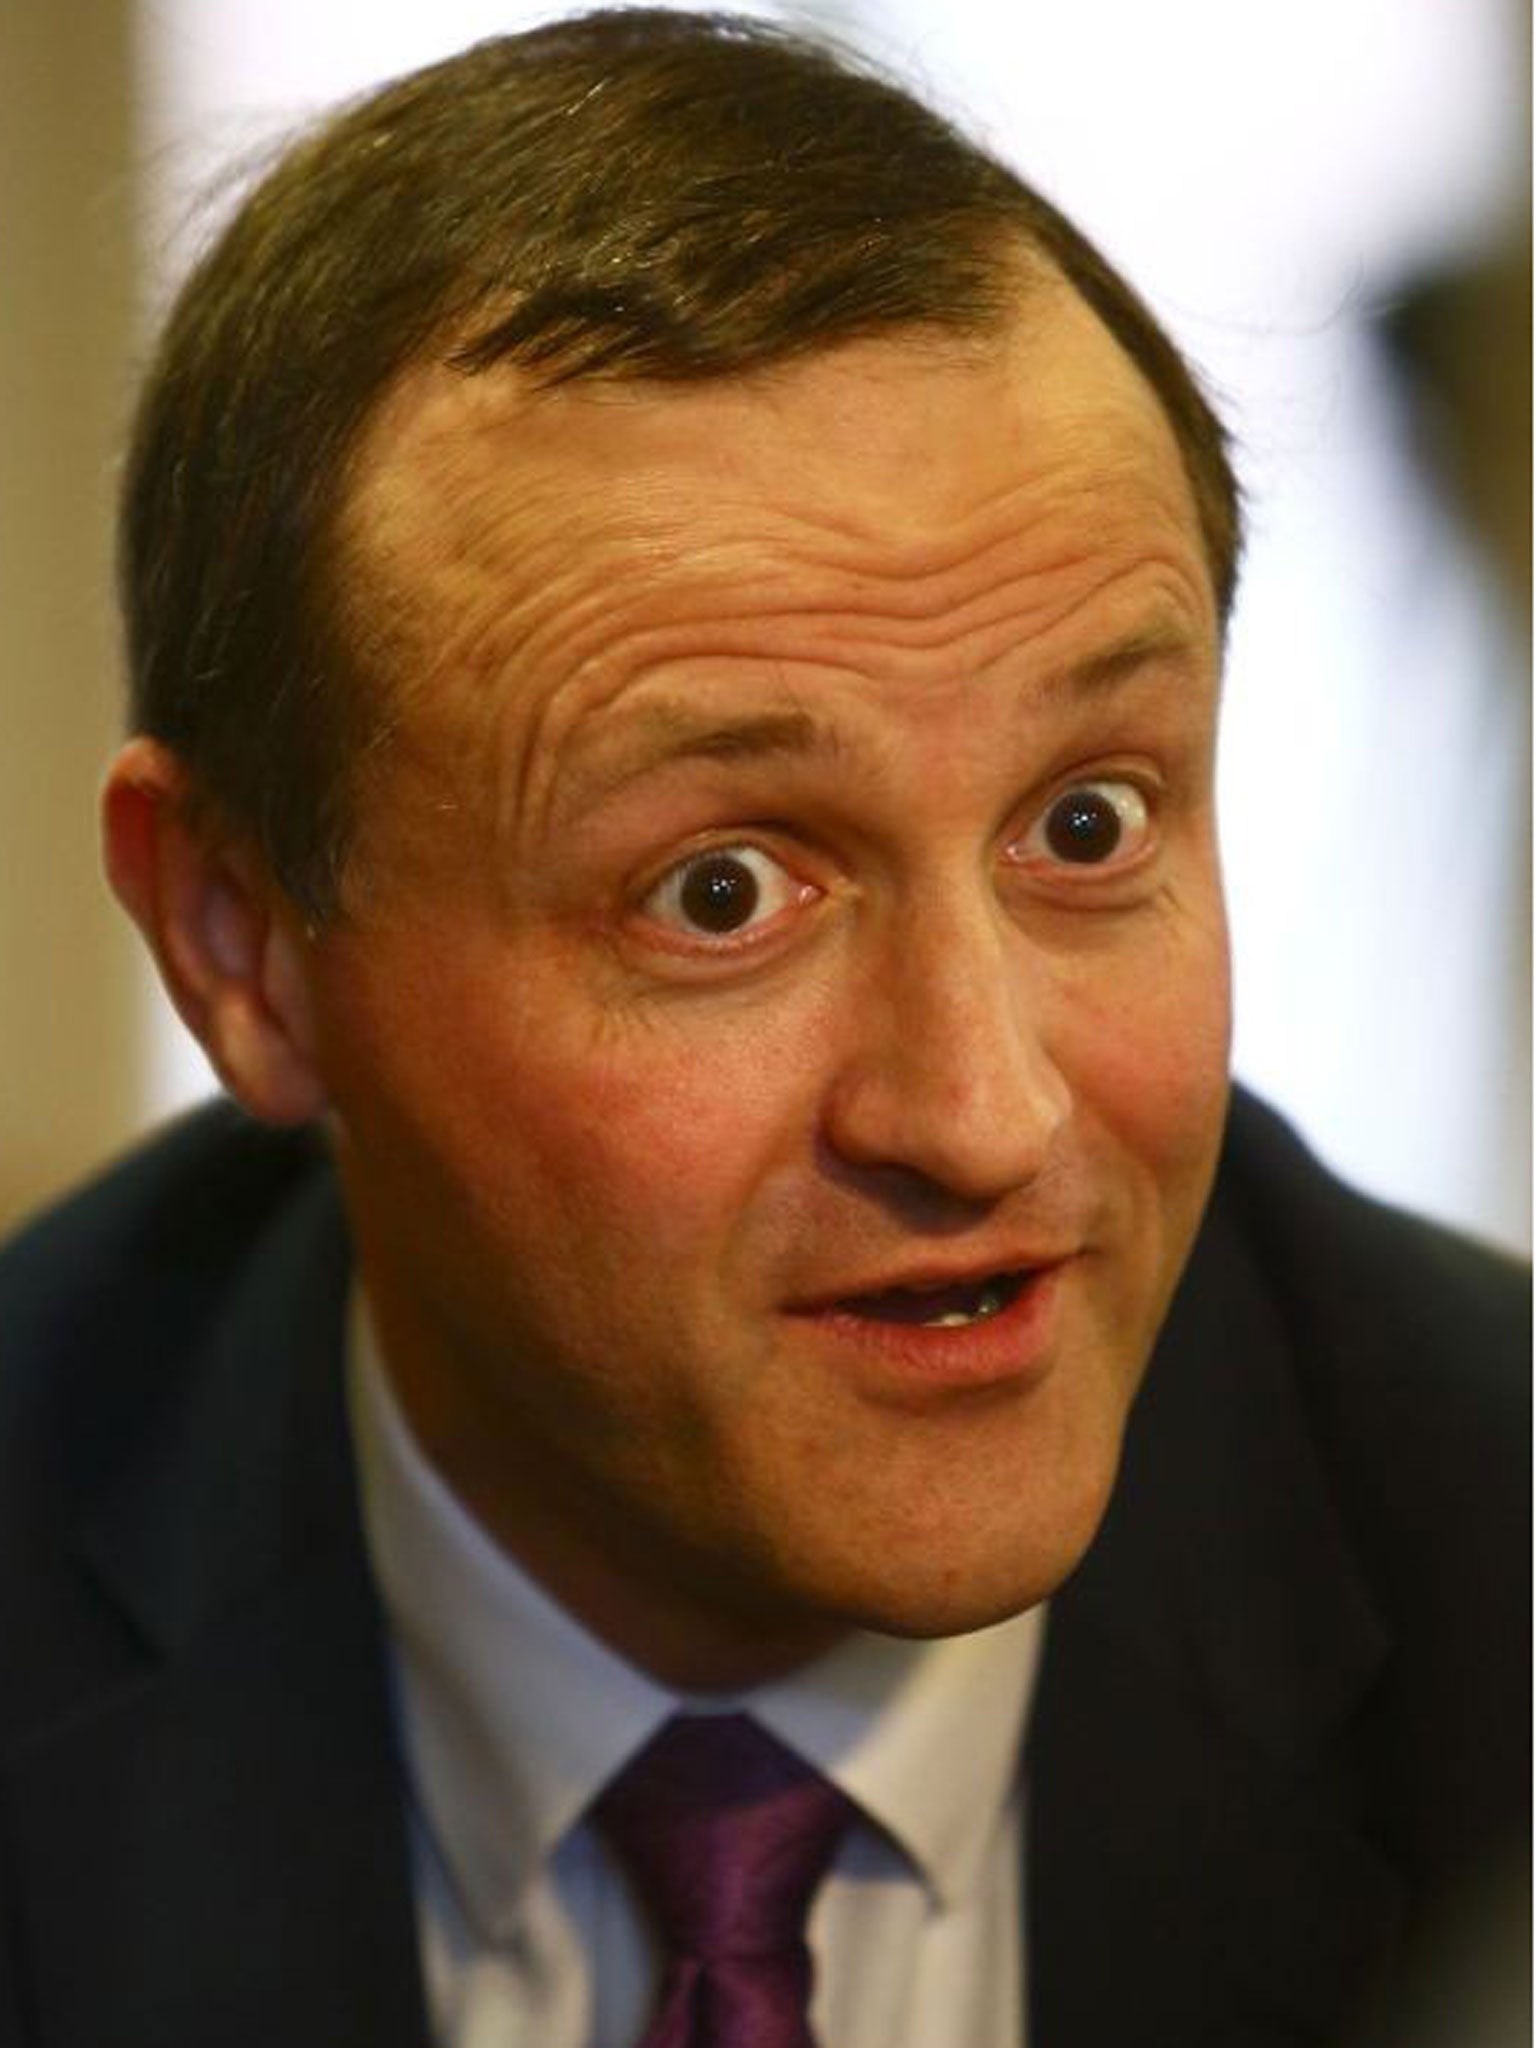 Pensions Minister Steve Webb has defended proposed curbs on pensions for people living abroad